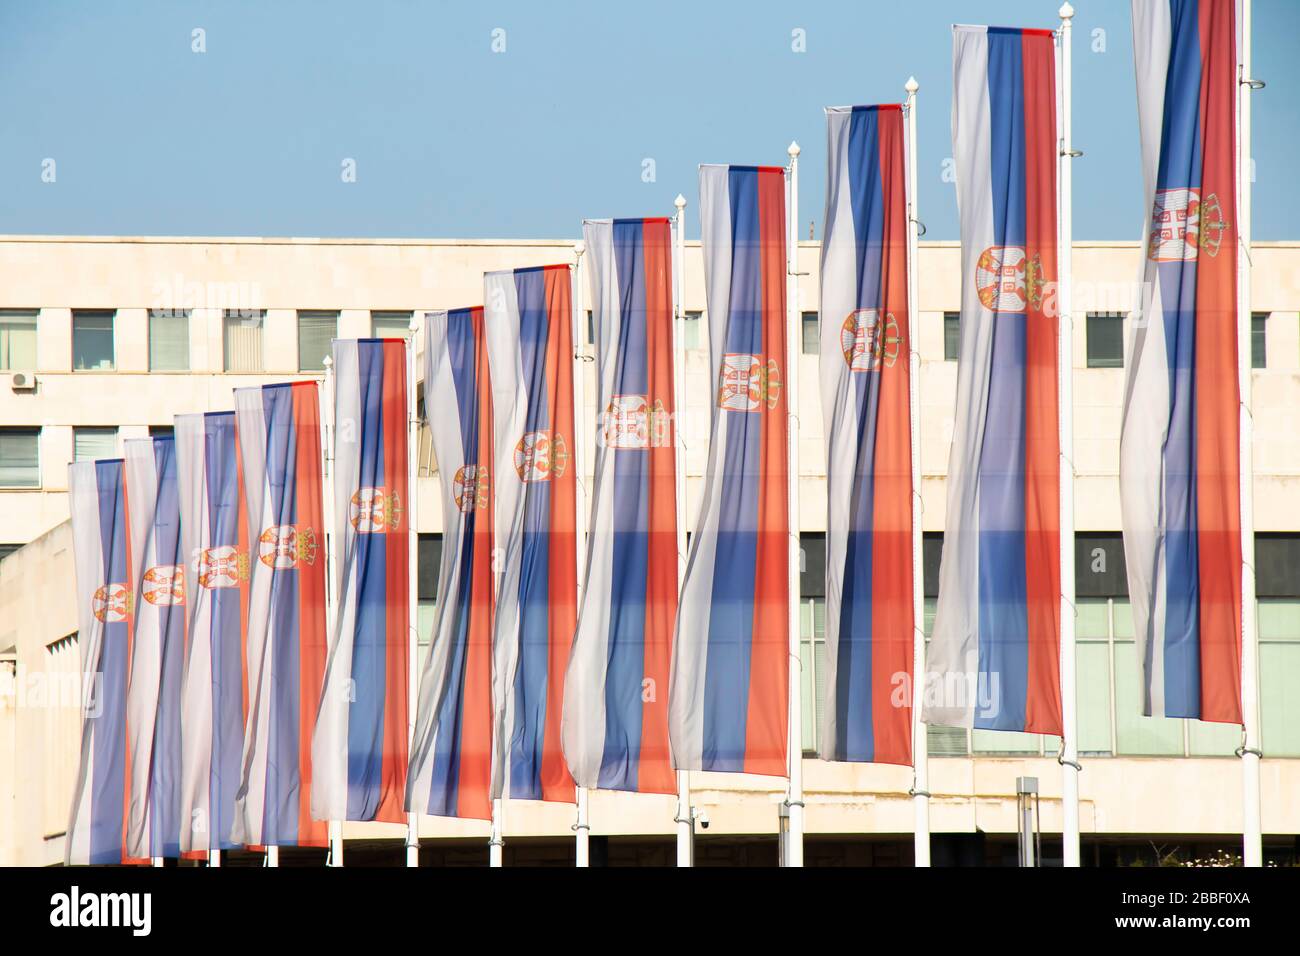 Belgrade, Serbia - March 20, 2020: Serbian national flags on poles in front of the Palace of Serbia, a governmental building located in New Belgrade Stock Photo